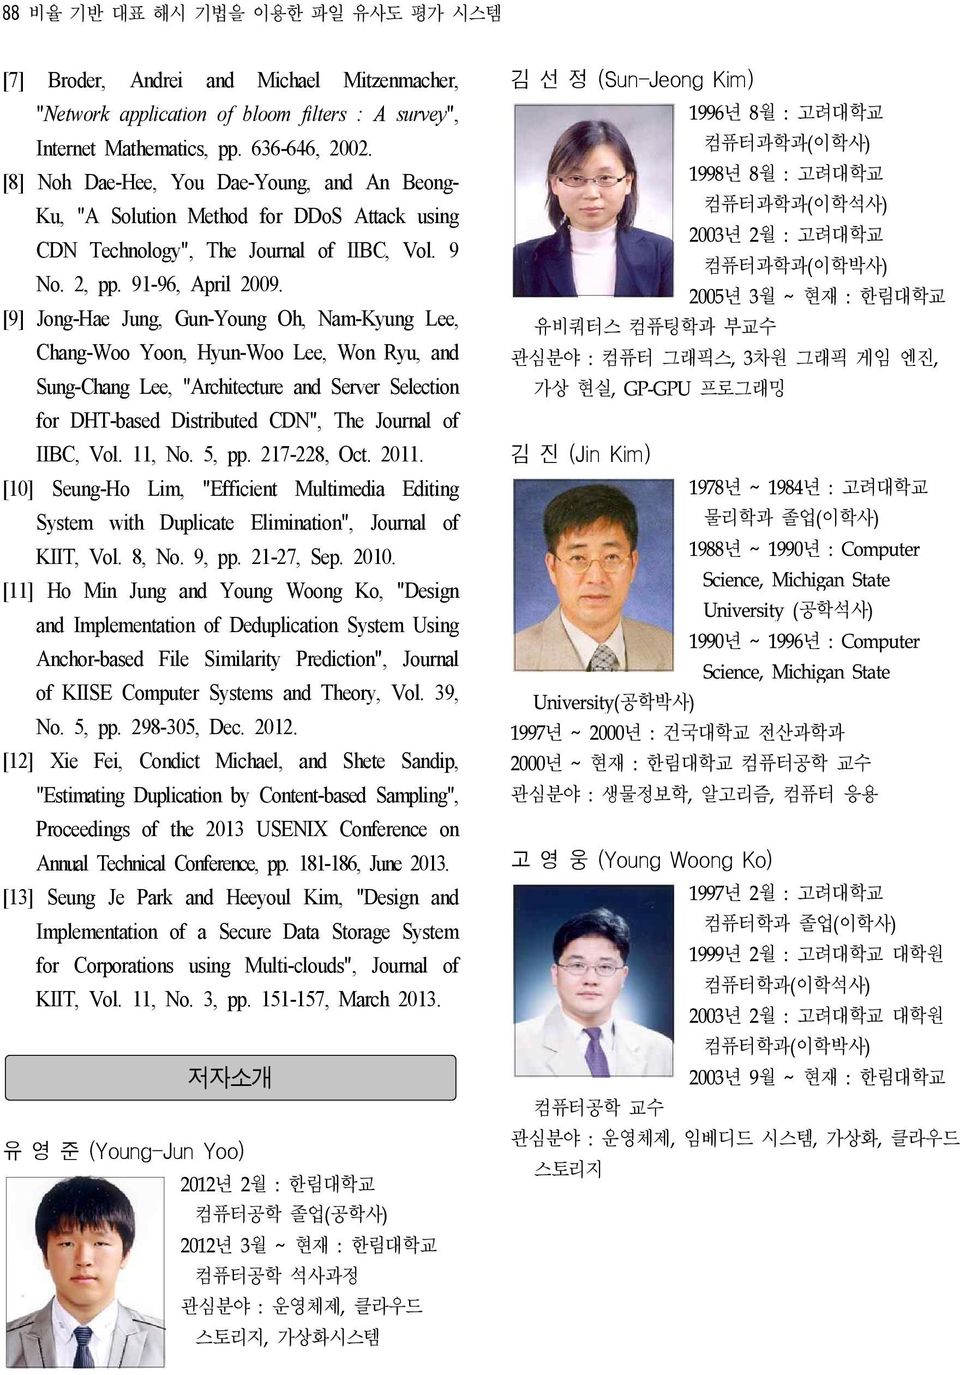 [9] Jong-Hae Jung, Gun-Young Oh, Nam-Kyung Lee, Chang-Woo Yoon, Hyun-Woo Lee, Won Ryu, and Sung-Chang Lee, "Architecture and Server Selection for DHT-based Distributed CDN", The Journal of IIBC, Vol.